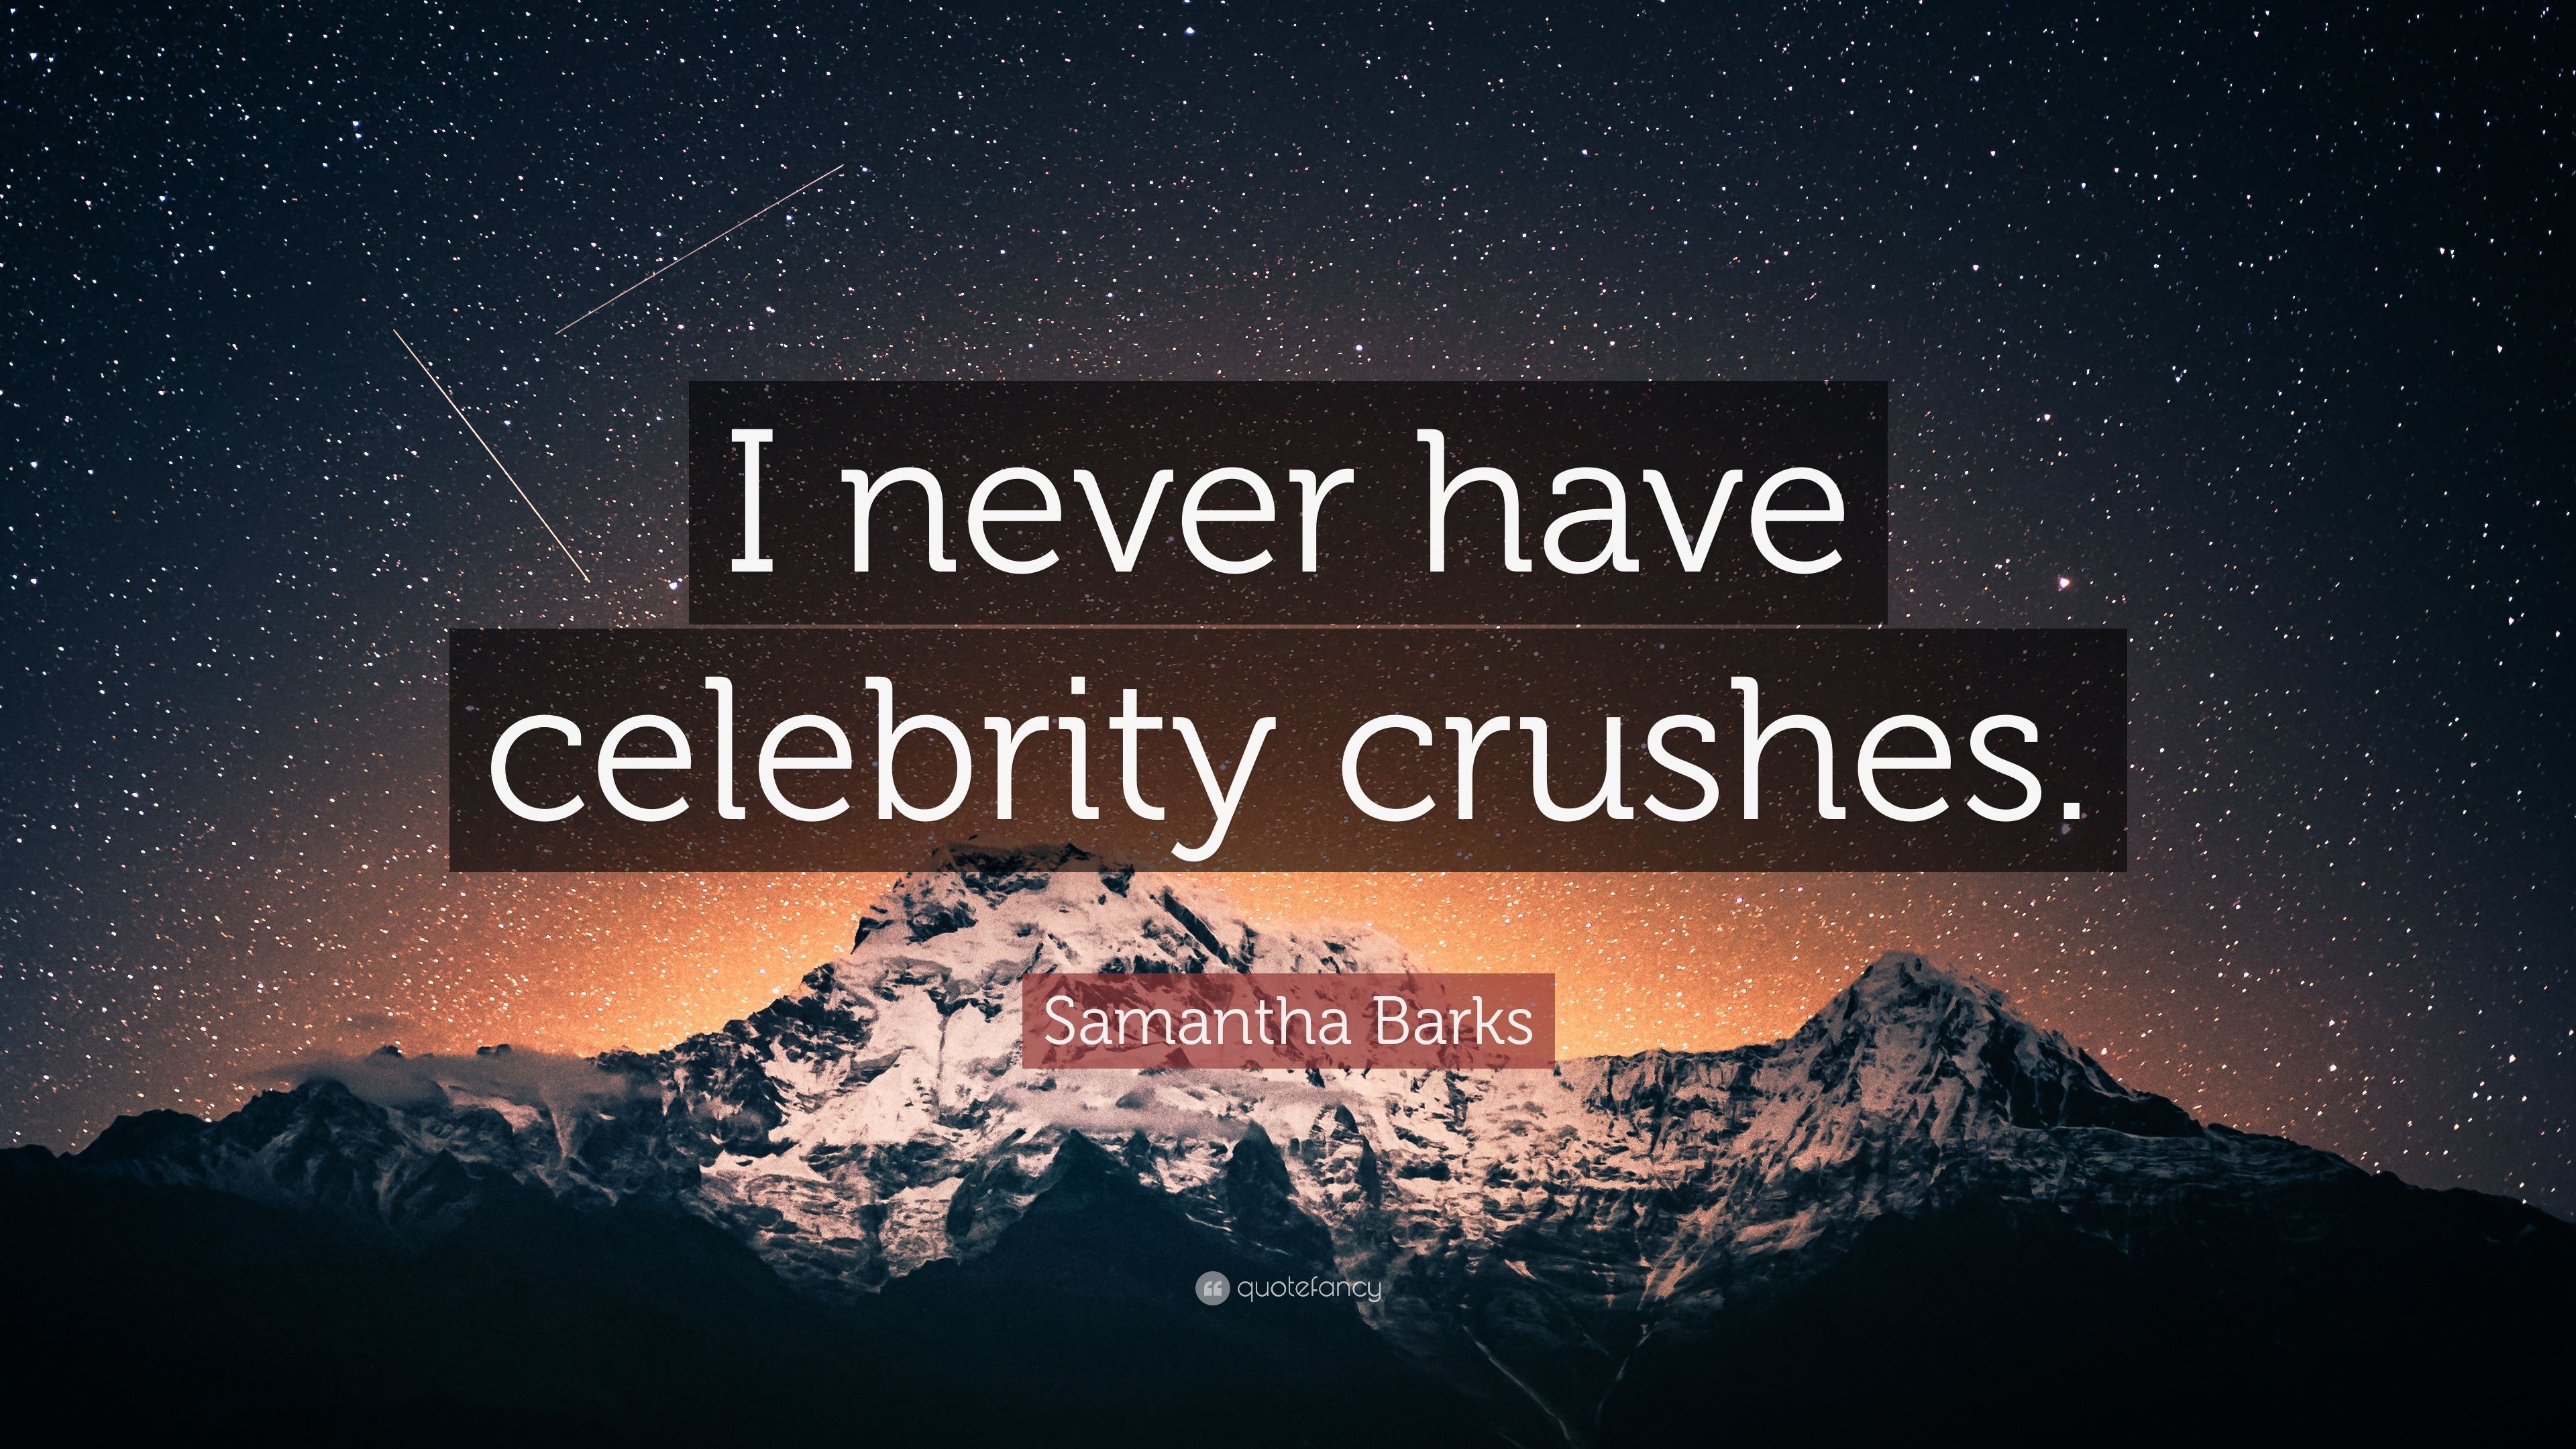 Samantha Barks Quote: “I never have celebrity crushes.” 7